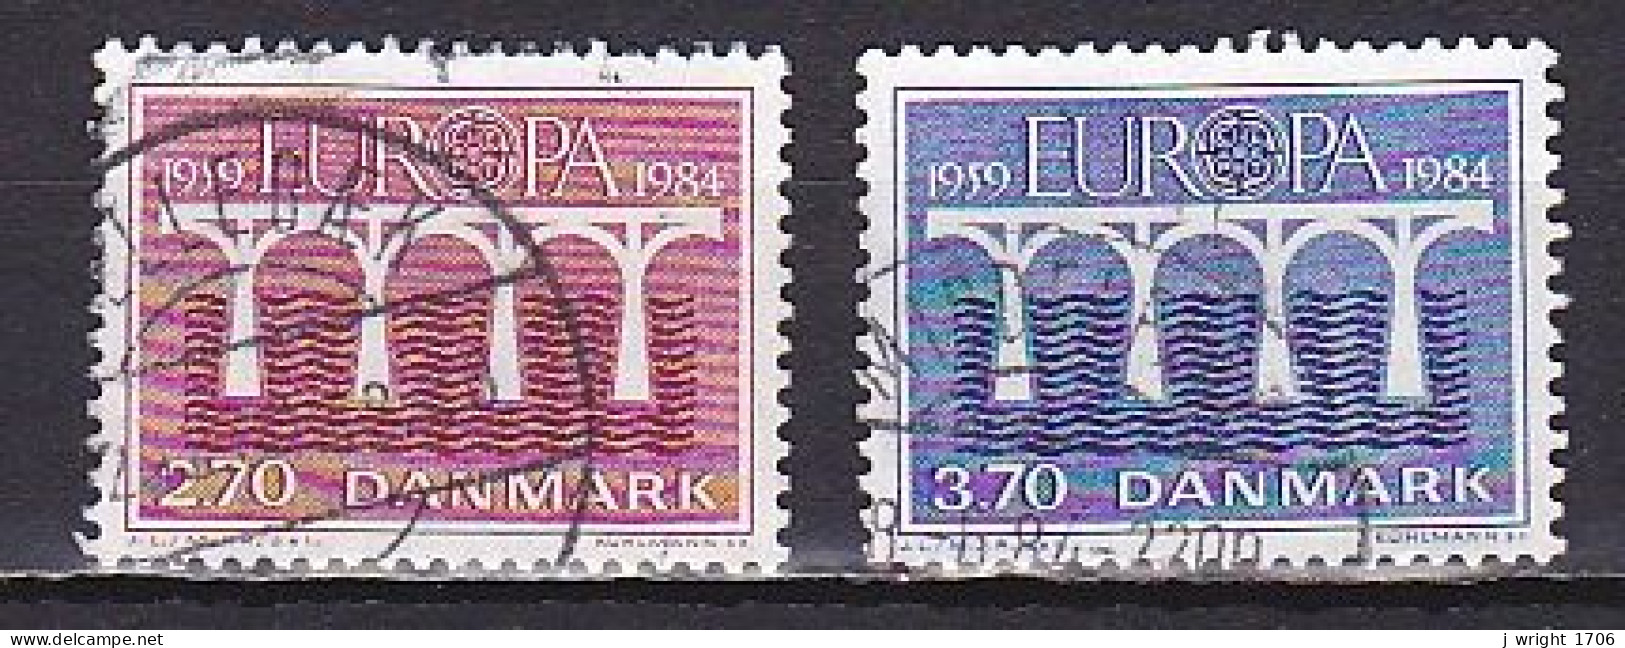 Denmark, 1984, Europa CEPT, Set, USED - Used Stamps